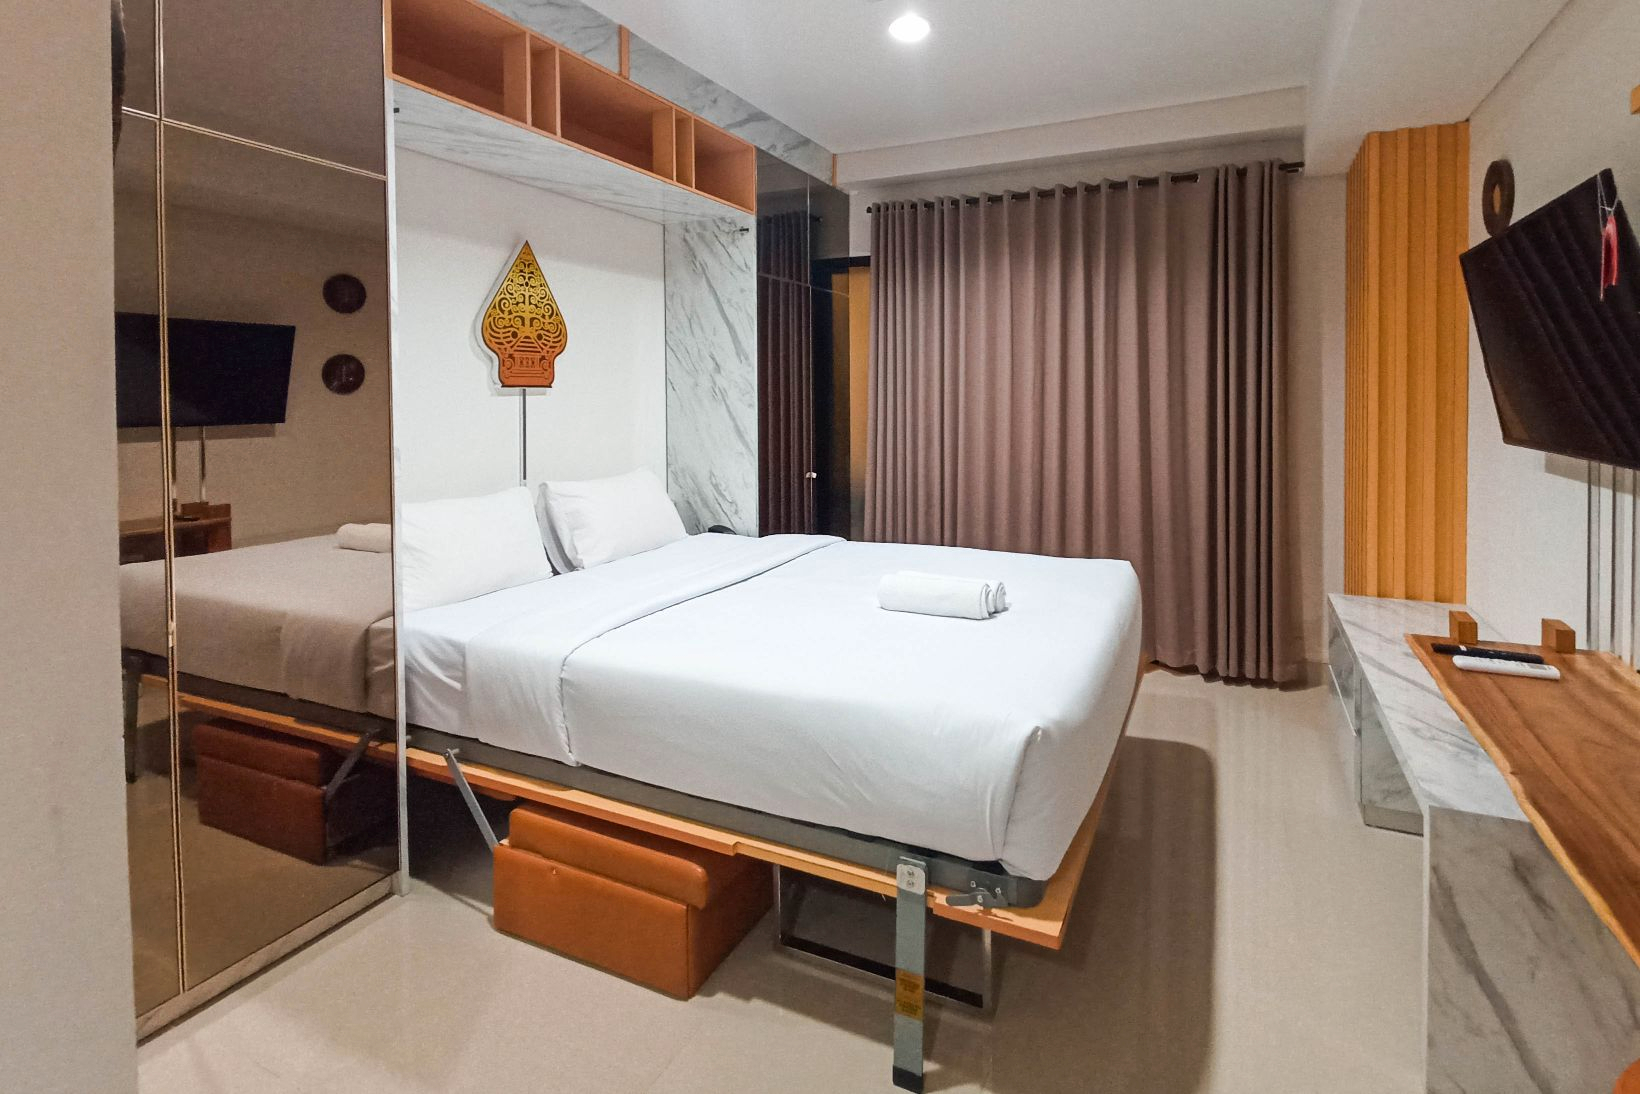 Great Choice and Comfy Studio Patraland Amarta Apartment By Travelio, Sleman